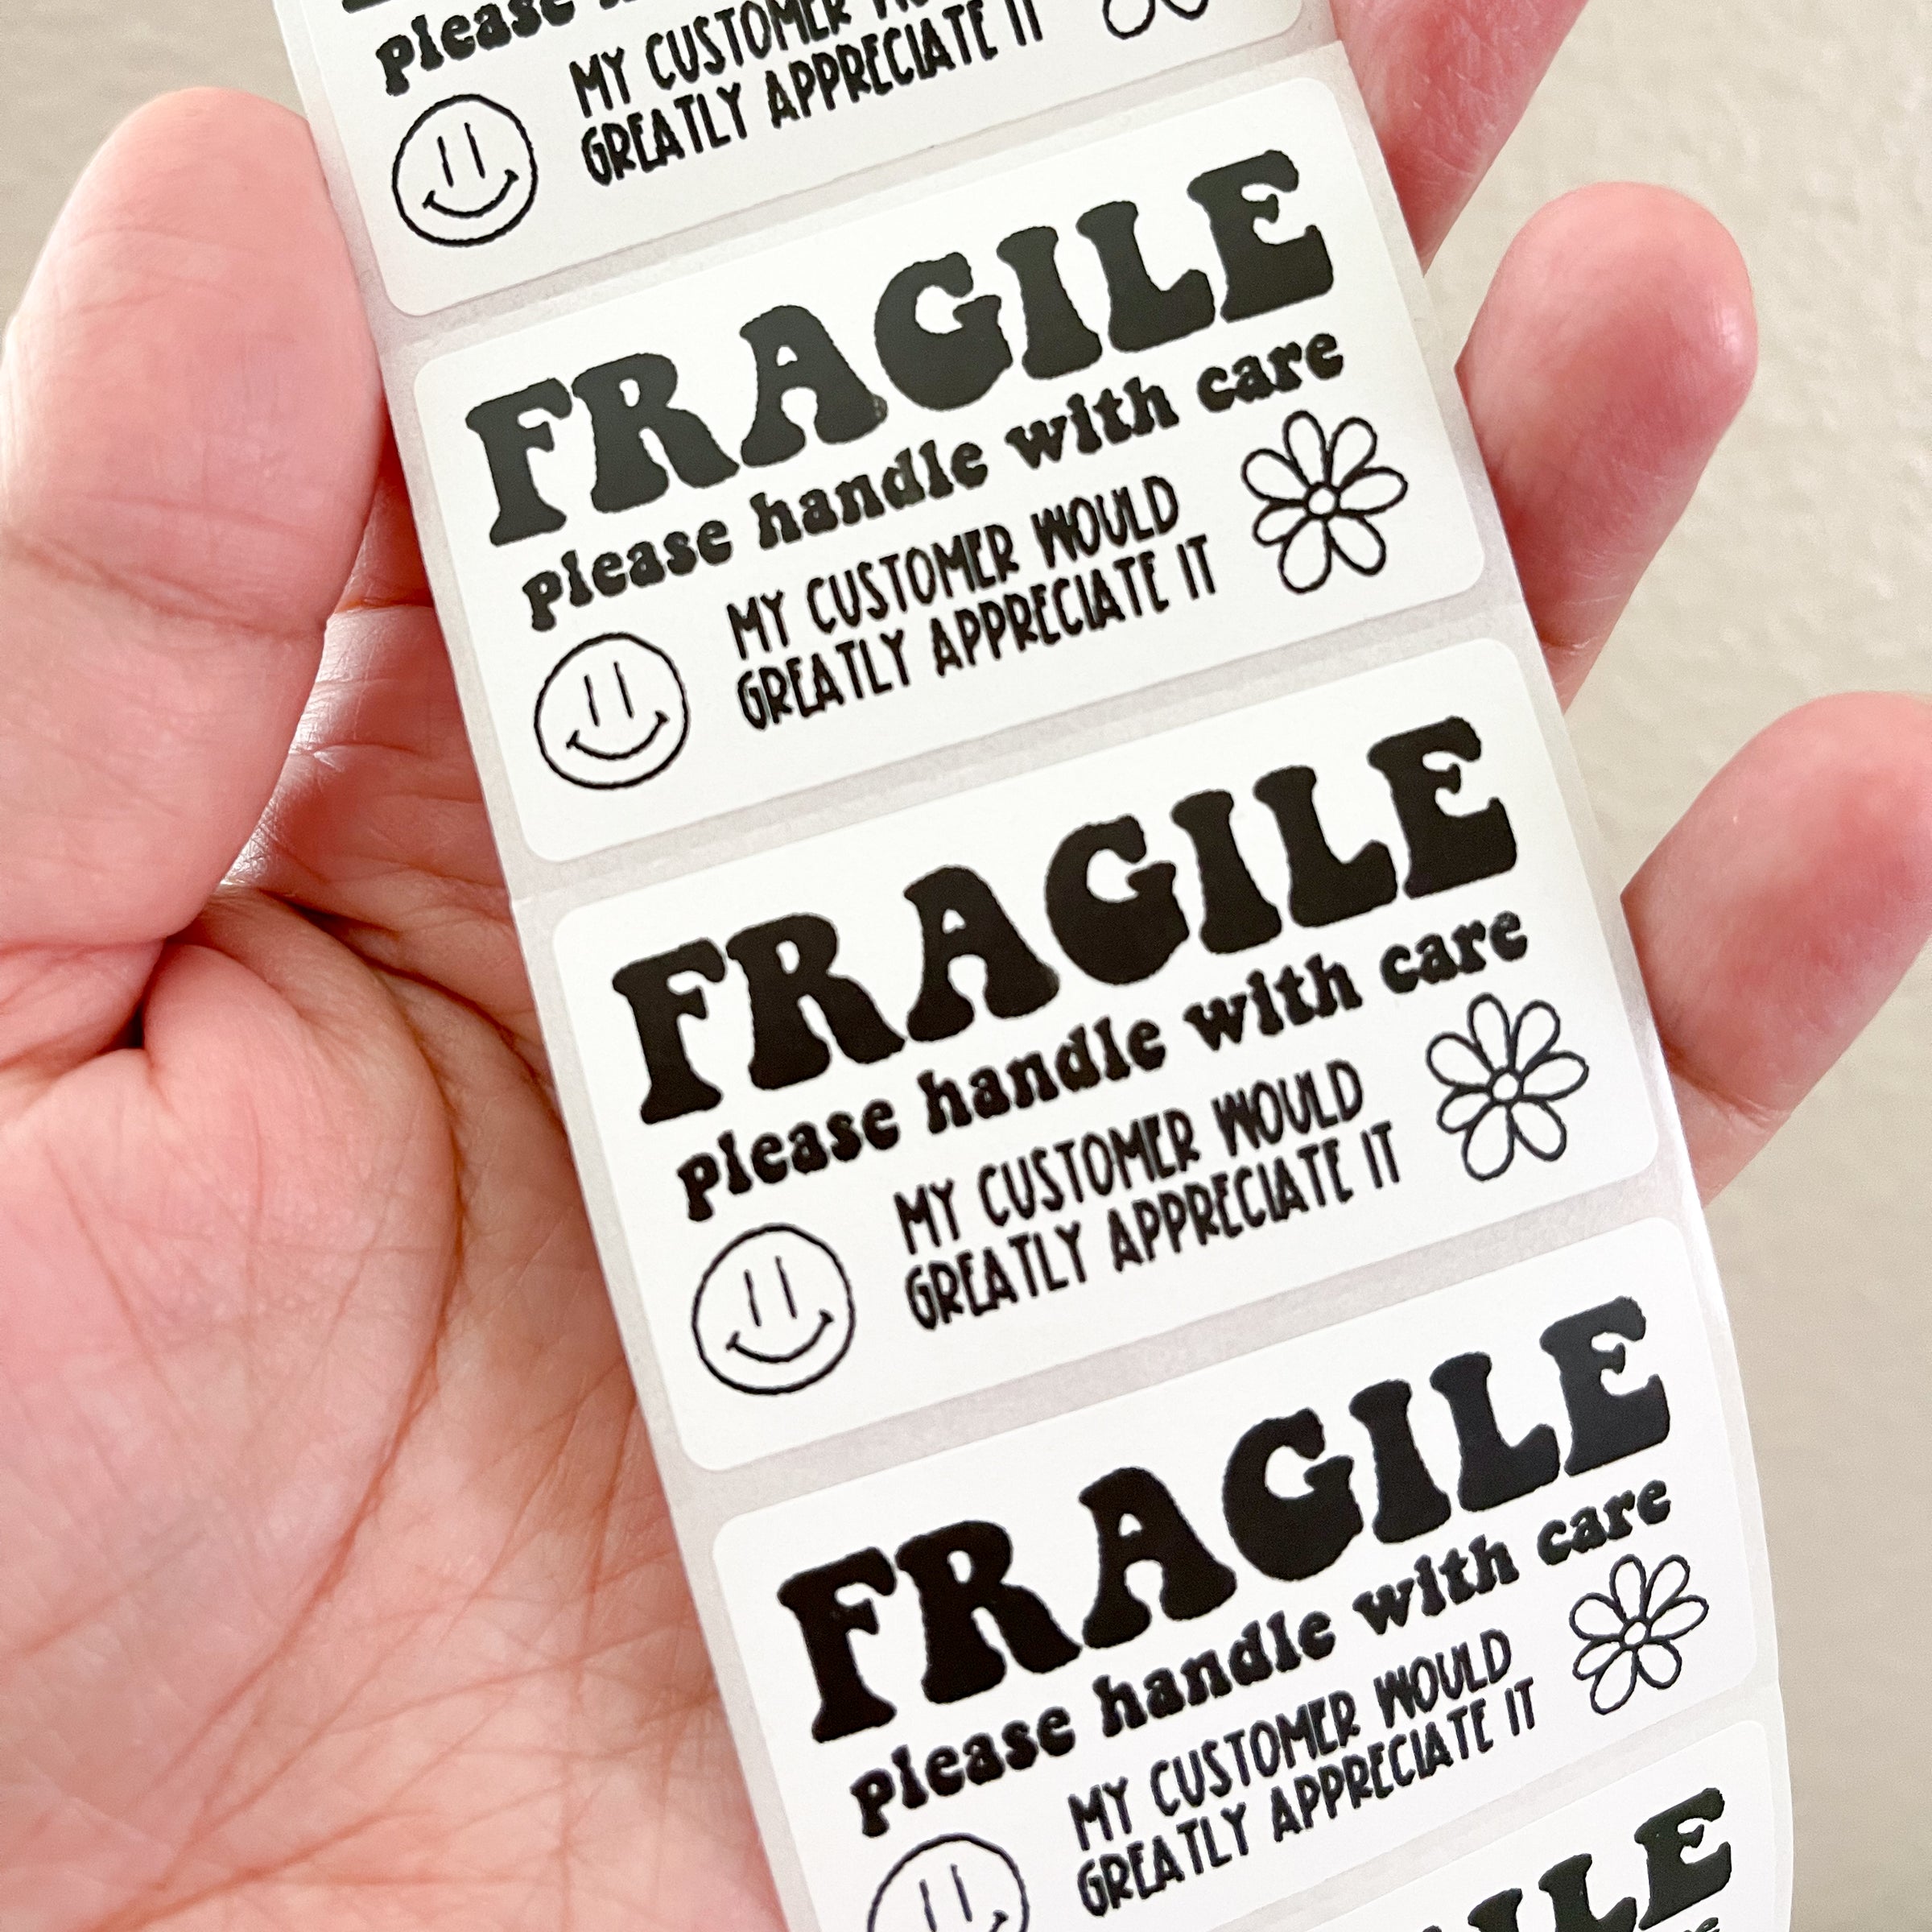 Fragile Please Handle with Care || Thermal Label